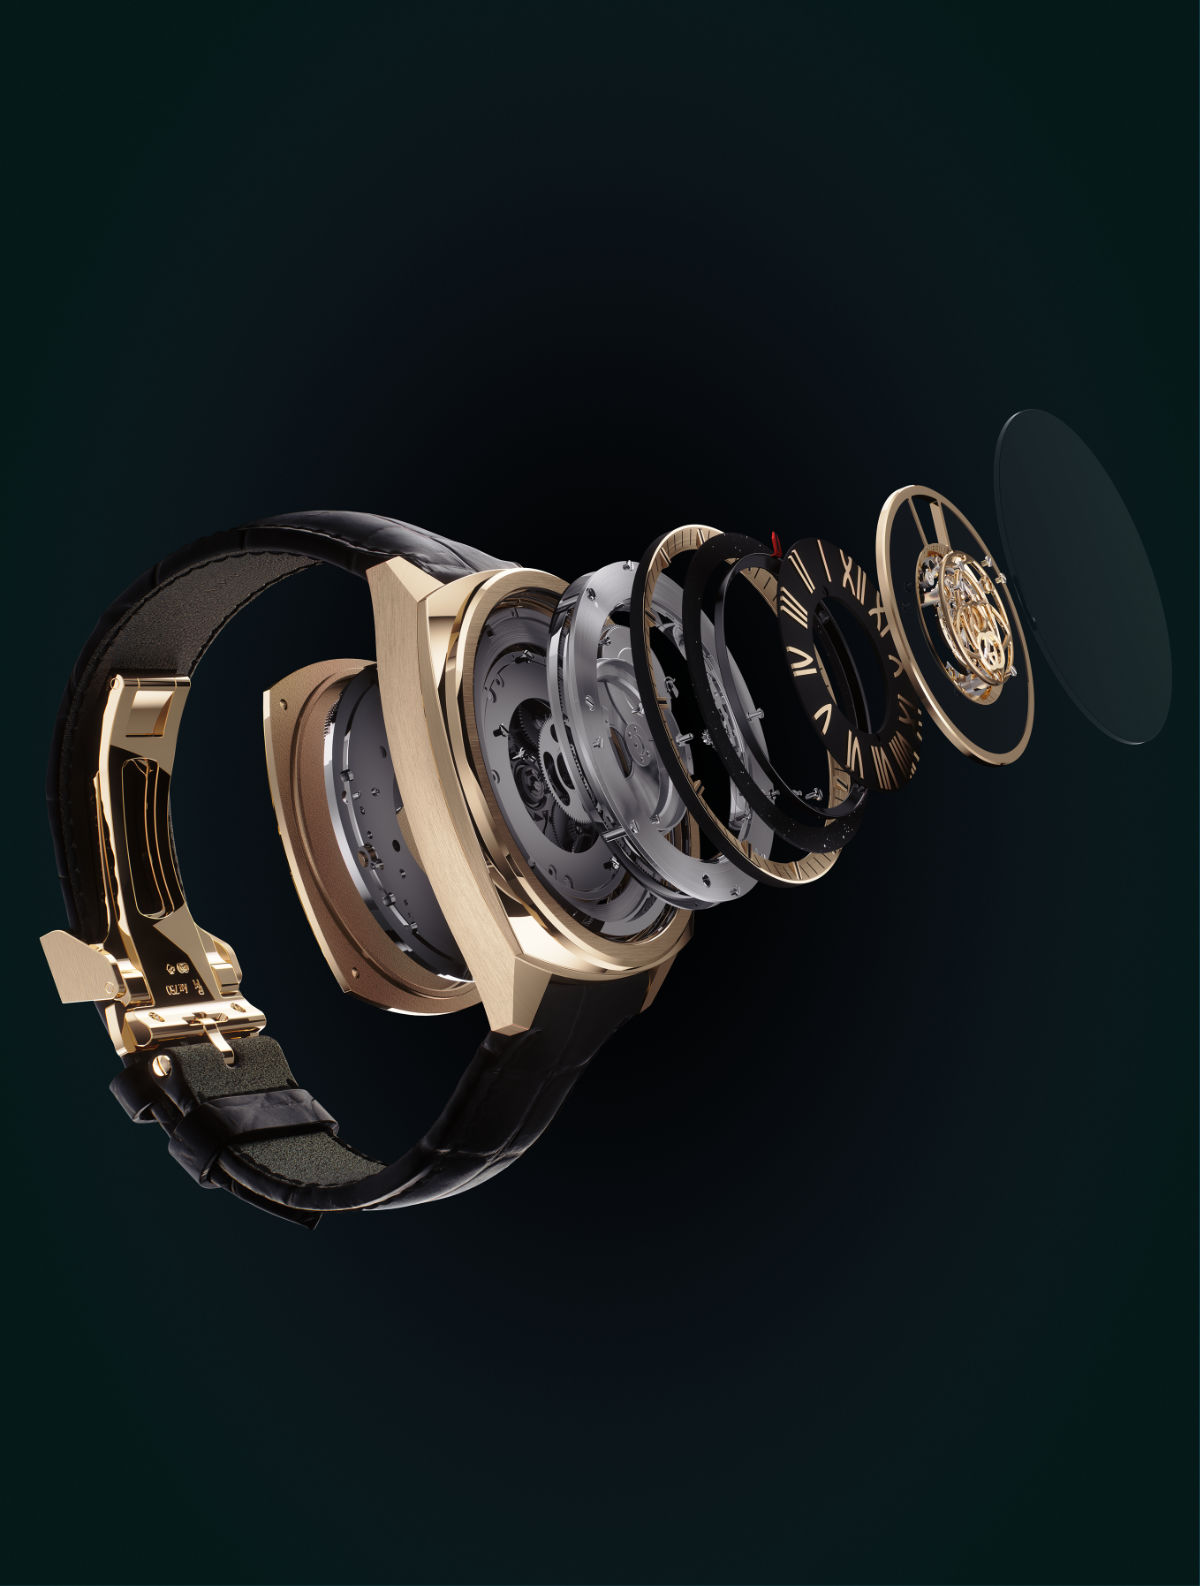 Gucci High Watchmaking Reaches Unprecedented Heights With New Complications